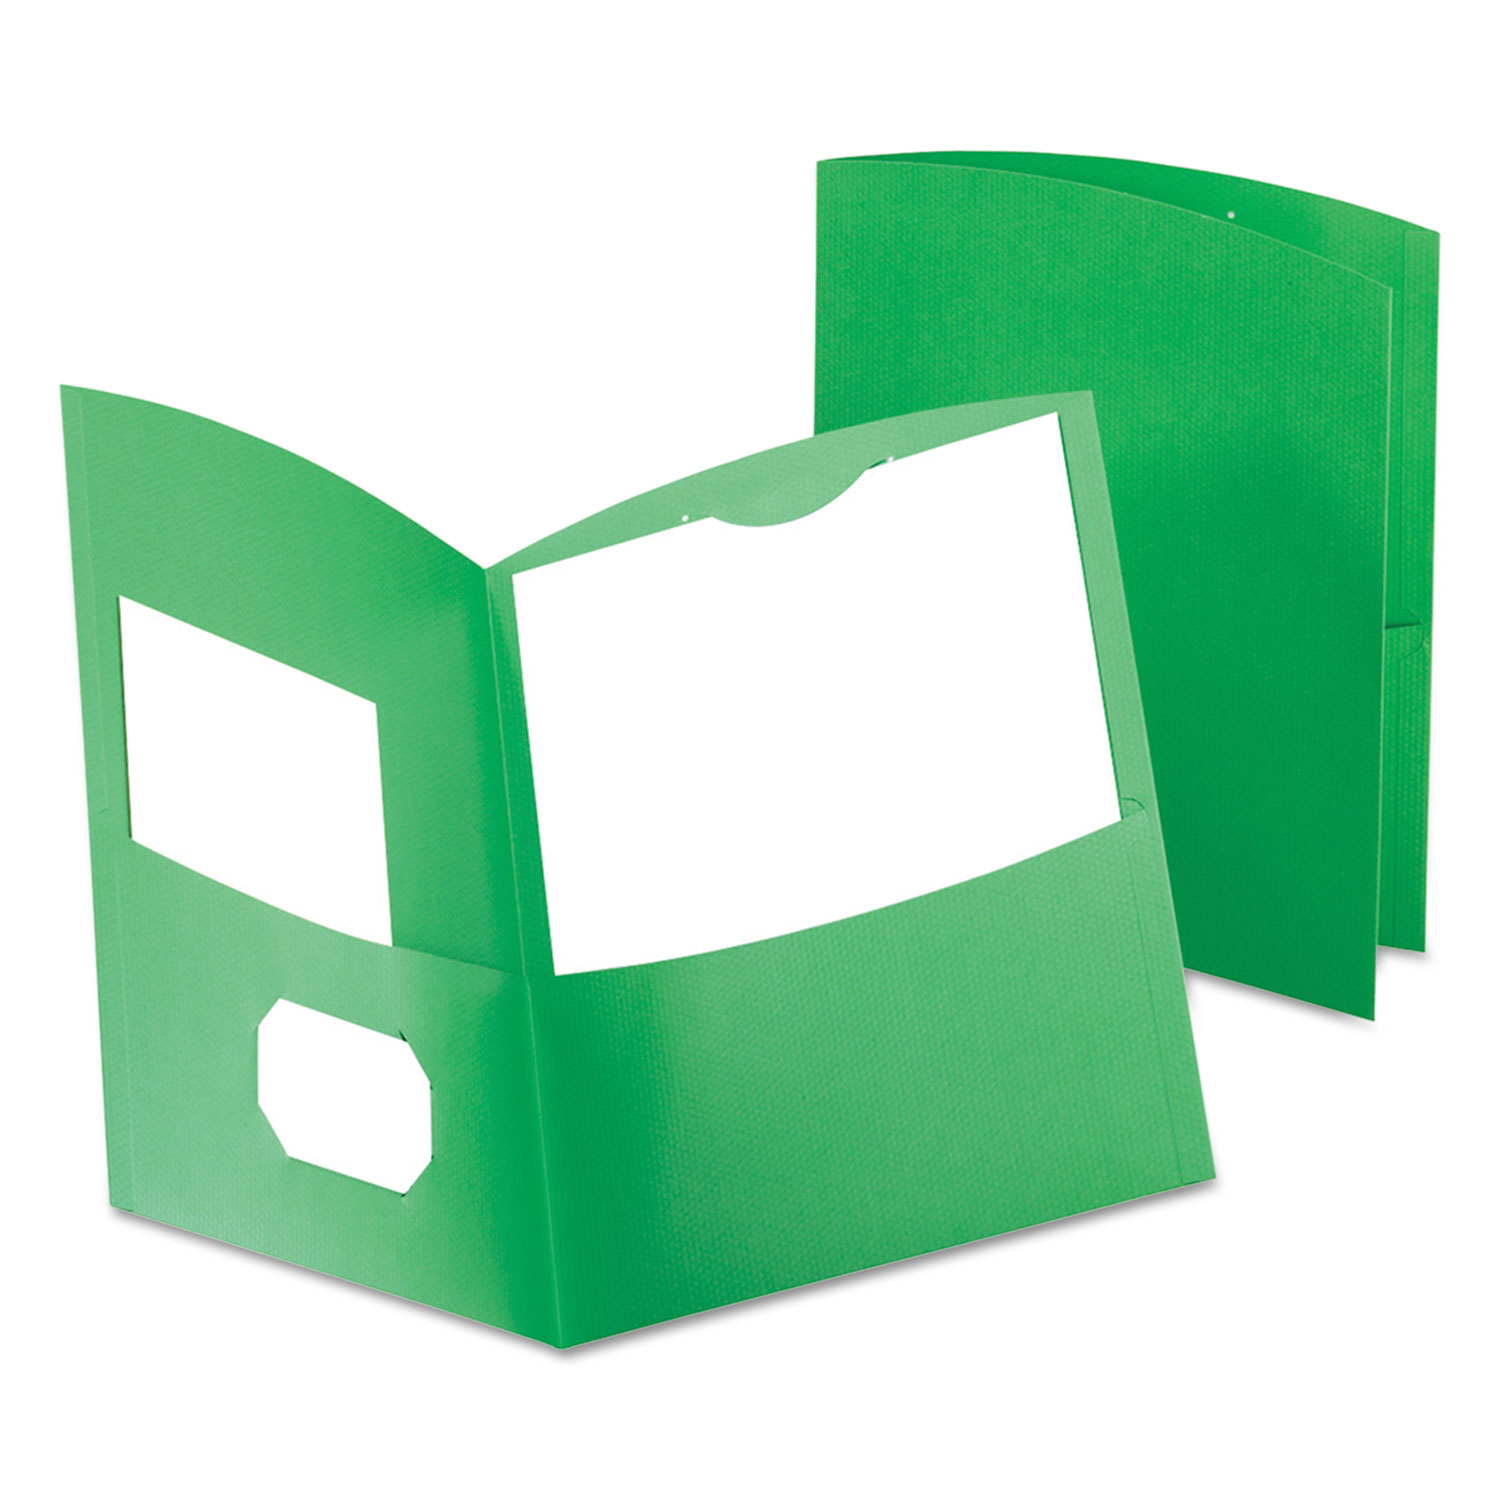  Oxford 5062560 Contour Two-Pocket Recycled Paper Folder, 100-Sheet Capacity, Green (OXF5062560) 